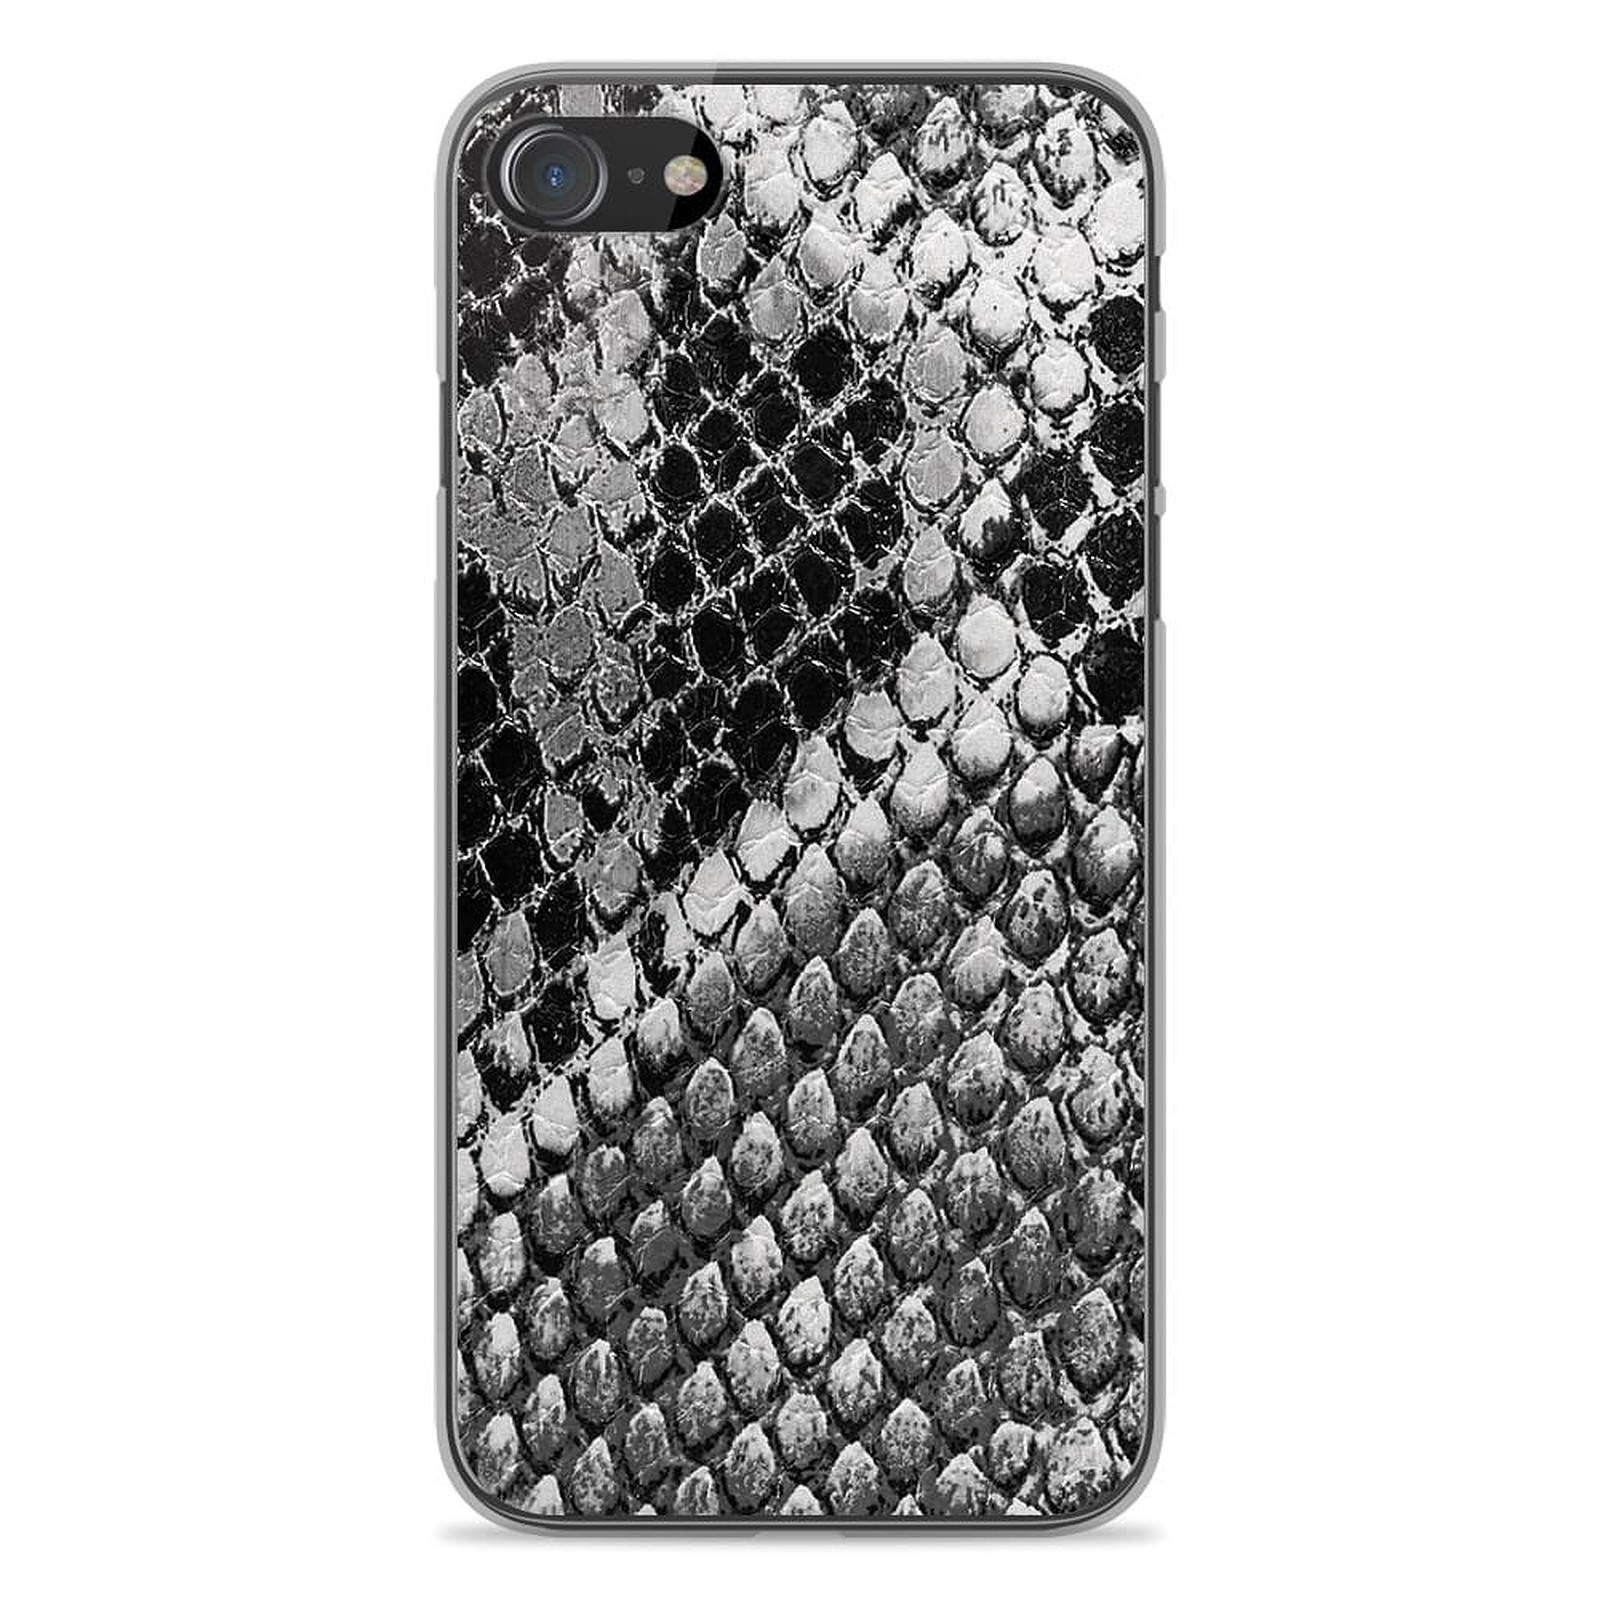 1001 Coques Coque silicone gel Apple iPhone SE 2020 motif Texture Python - Coque telephone 1001Coques